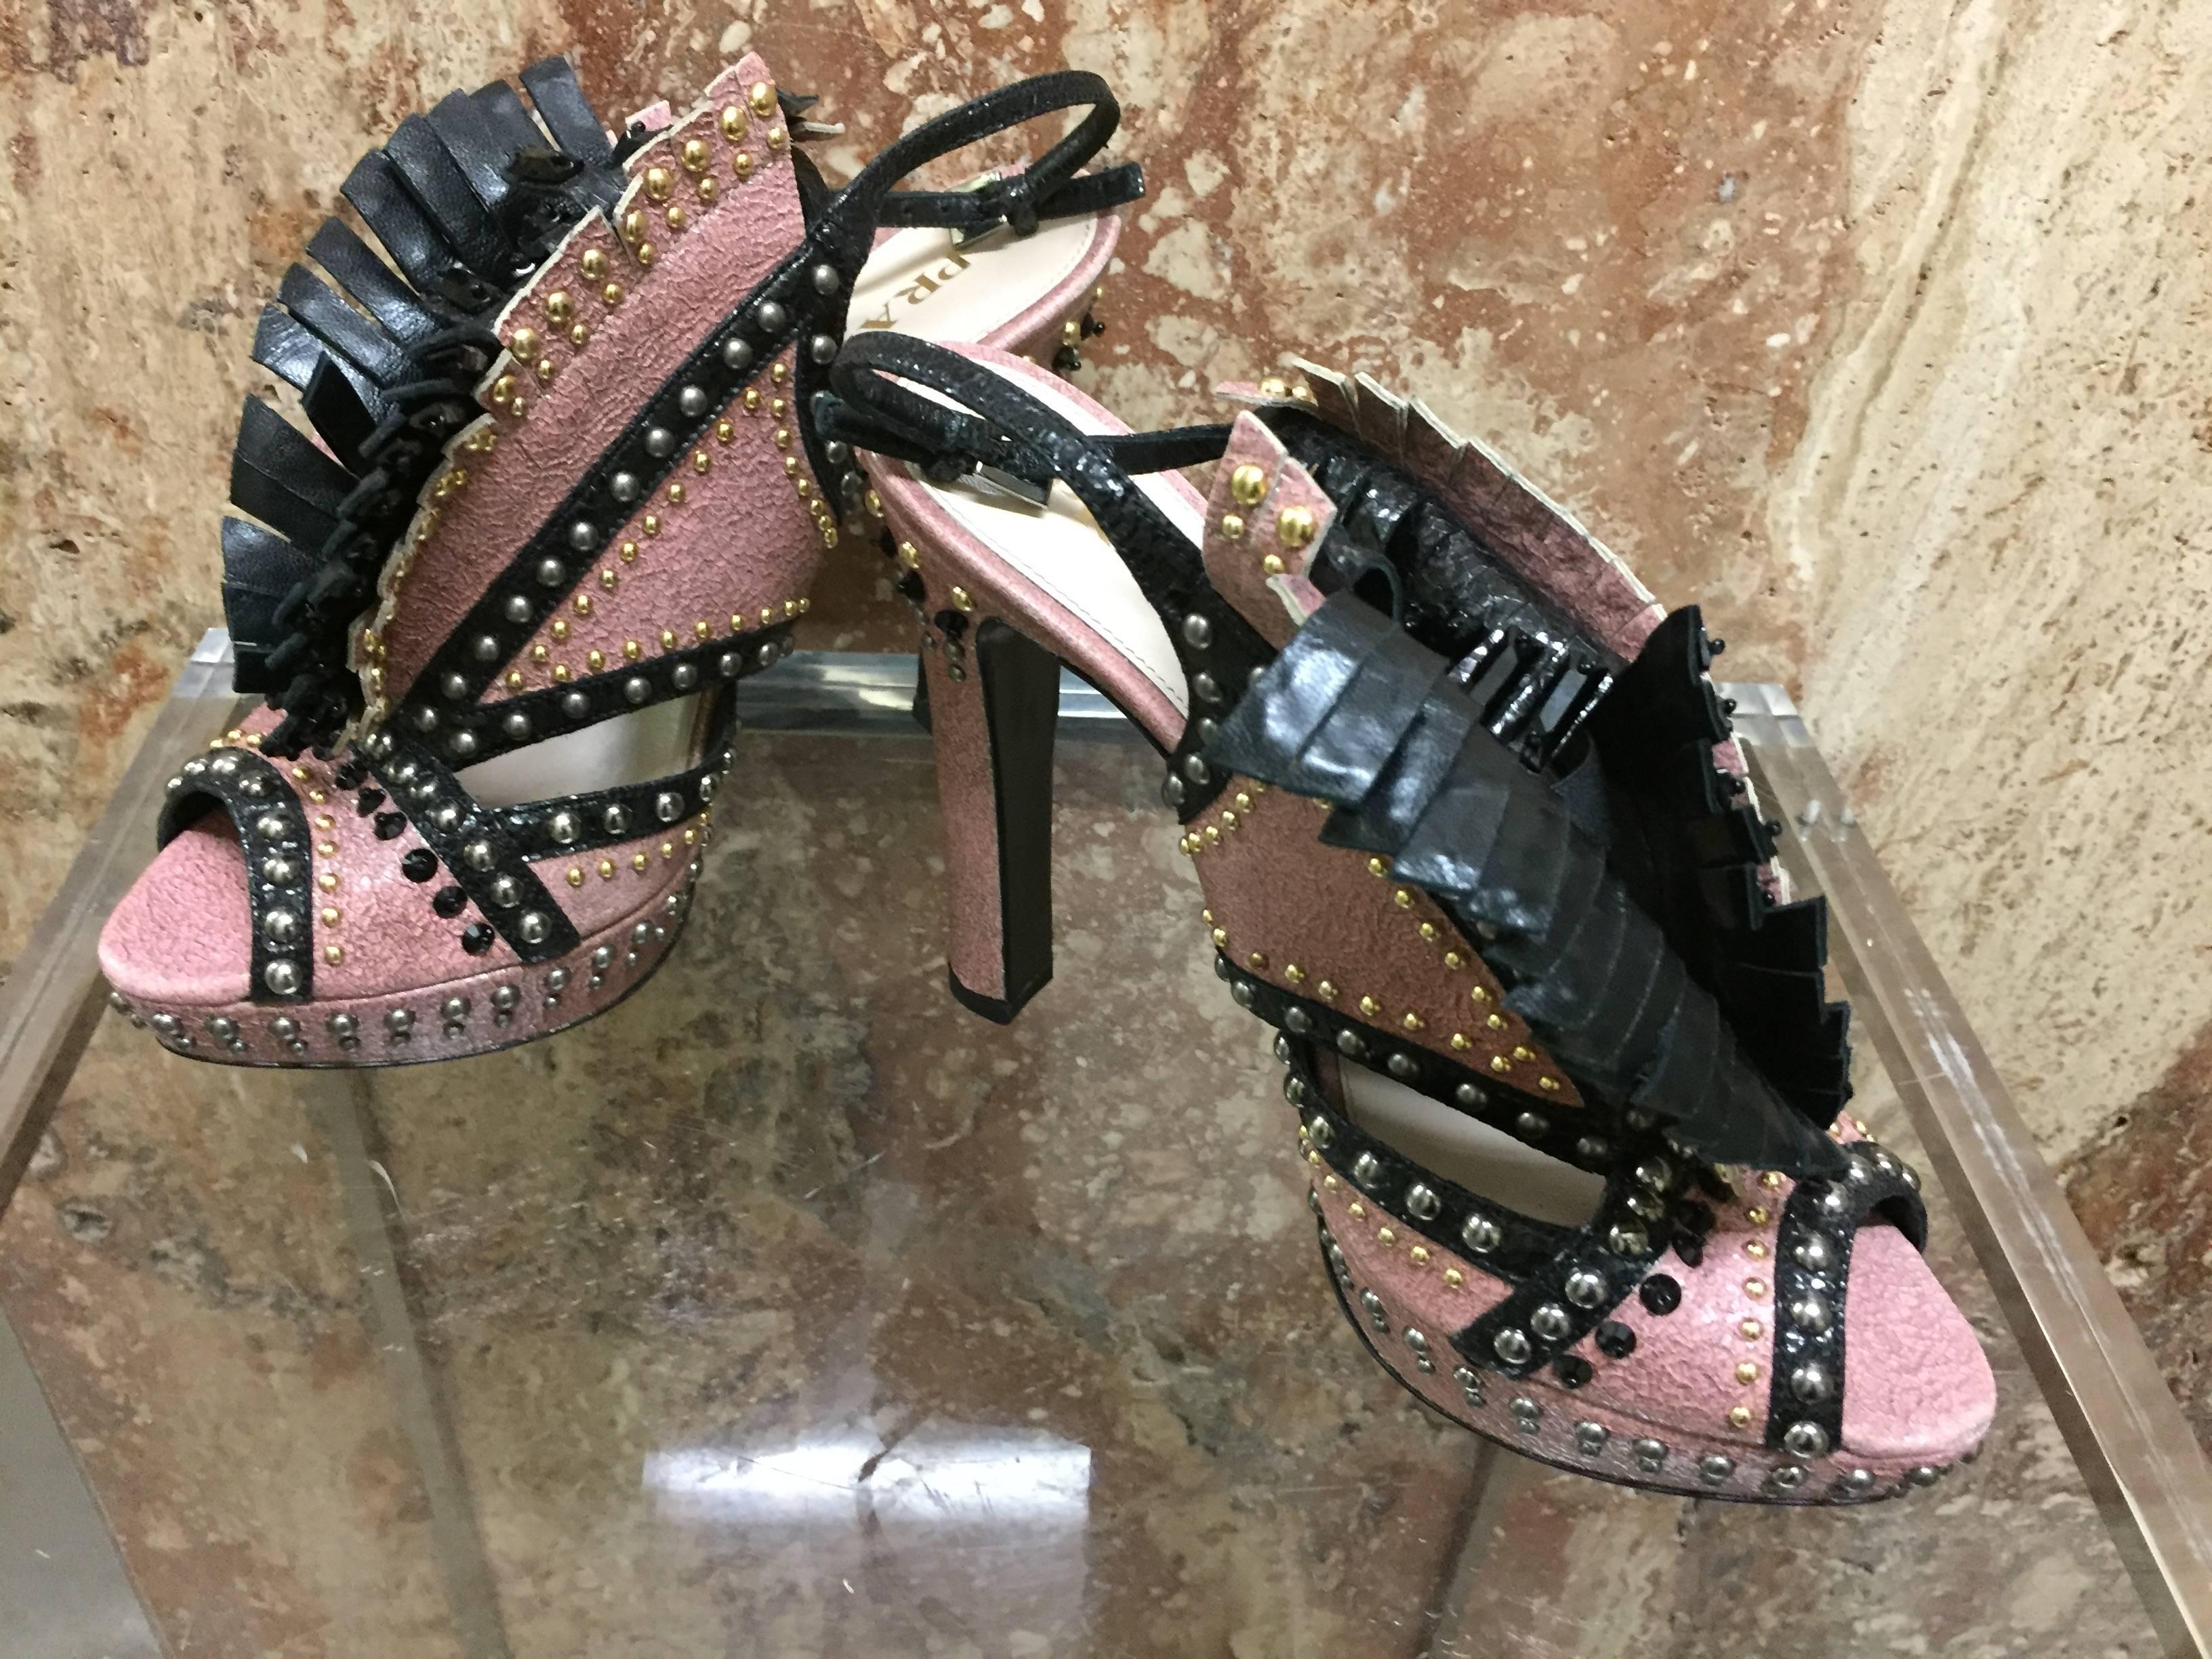 Prada pink and black distressed leather platform slingback sandals: A little Western-influenced styling to these studded beauties!  Black leather fringe at vamp.  Size 39.5. Never worn.